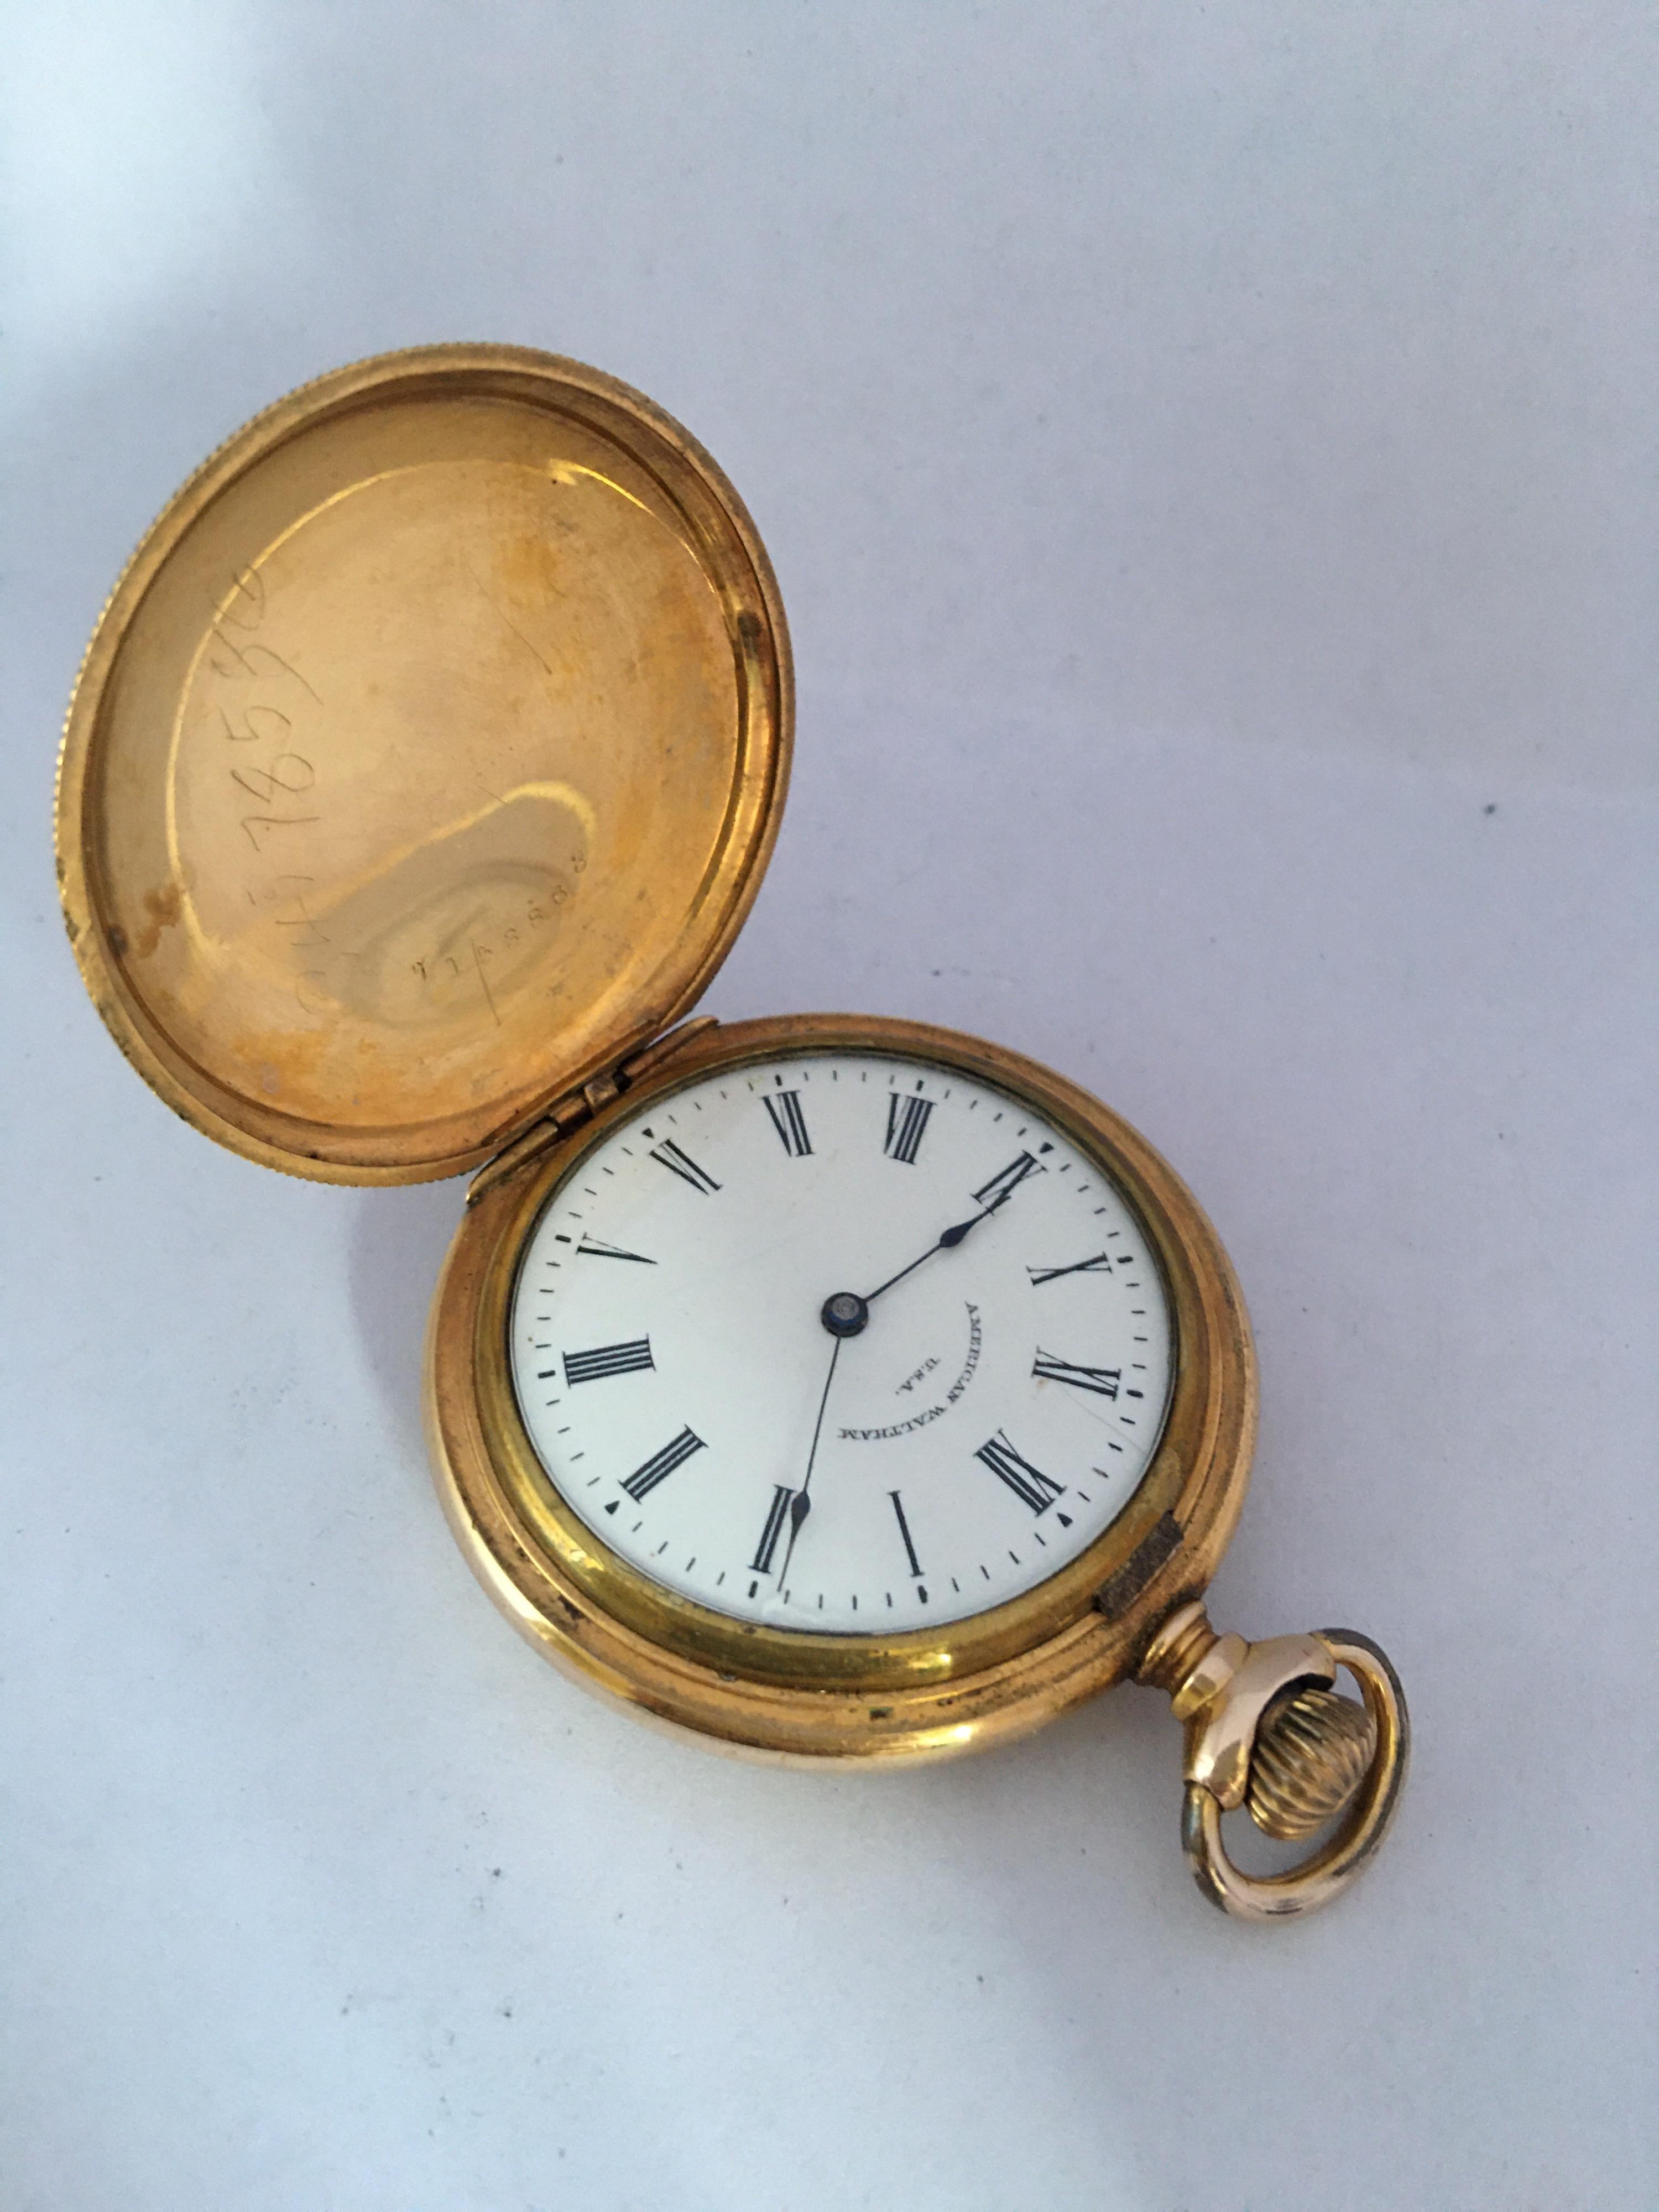 Waltham gold plated lever hunter fob watch, circa 1899, signed gilt movement with compensated balance, regulator and safety barrel, no. 9453261, signed dial with Roman numerals and minute markers, blued steel hands, within a Fahys engine turned and